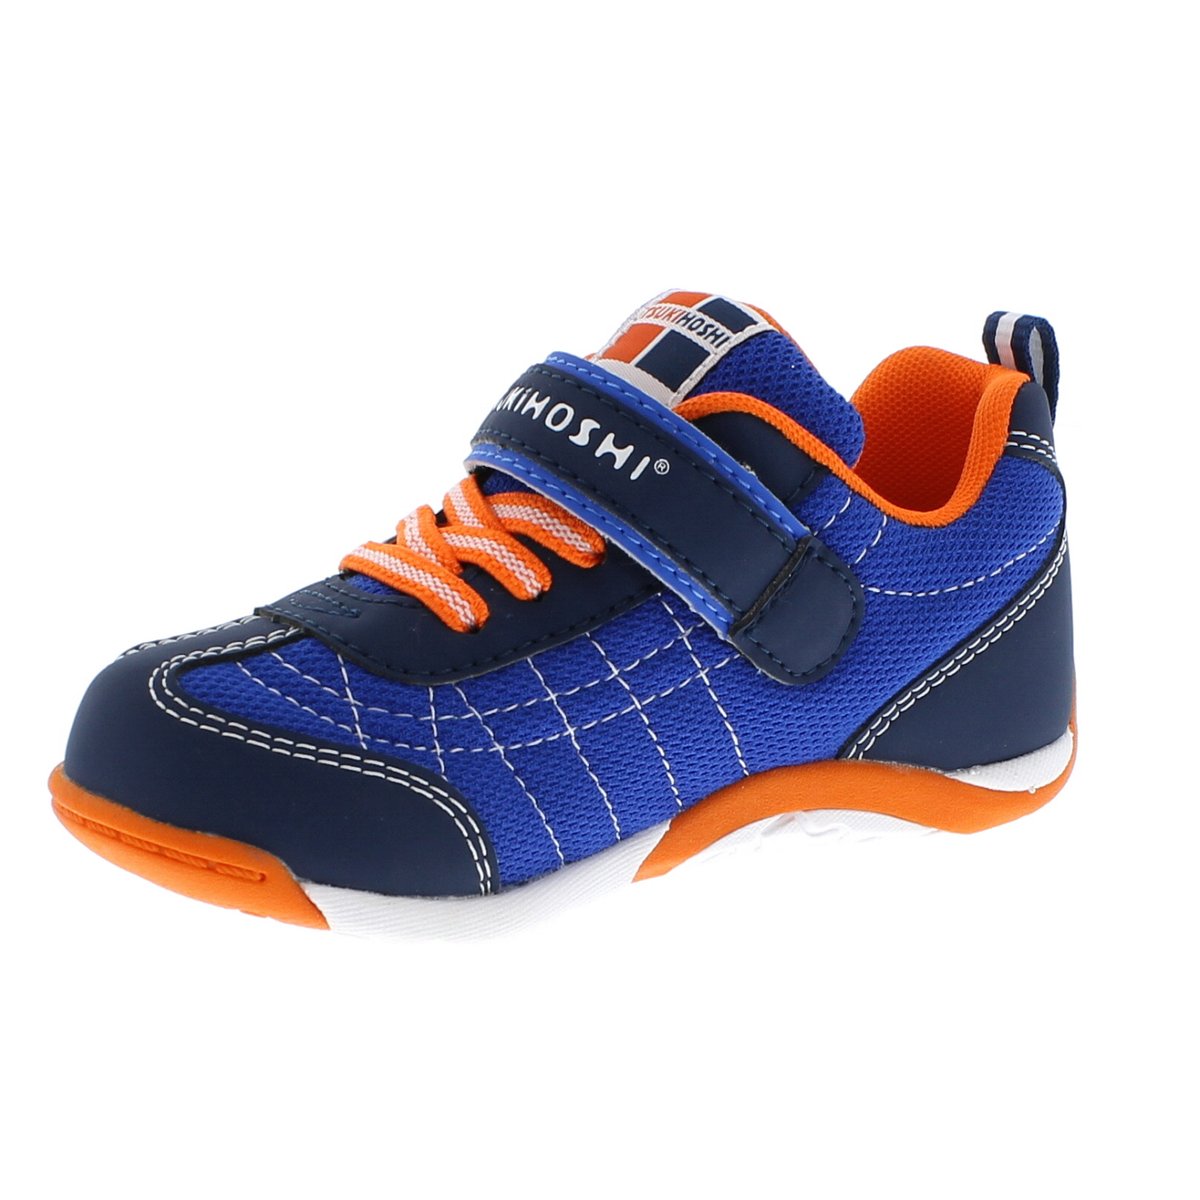 Child Tsukihoshi Kaz Sneaker in Navy/Tangerine from the front view